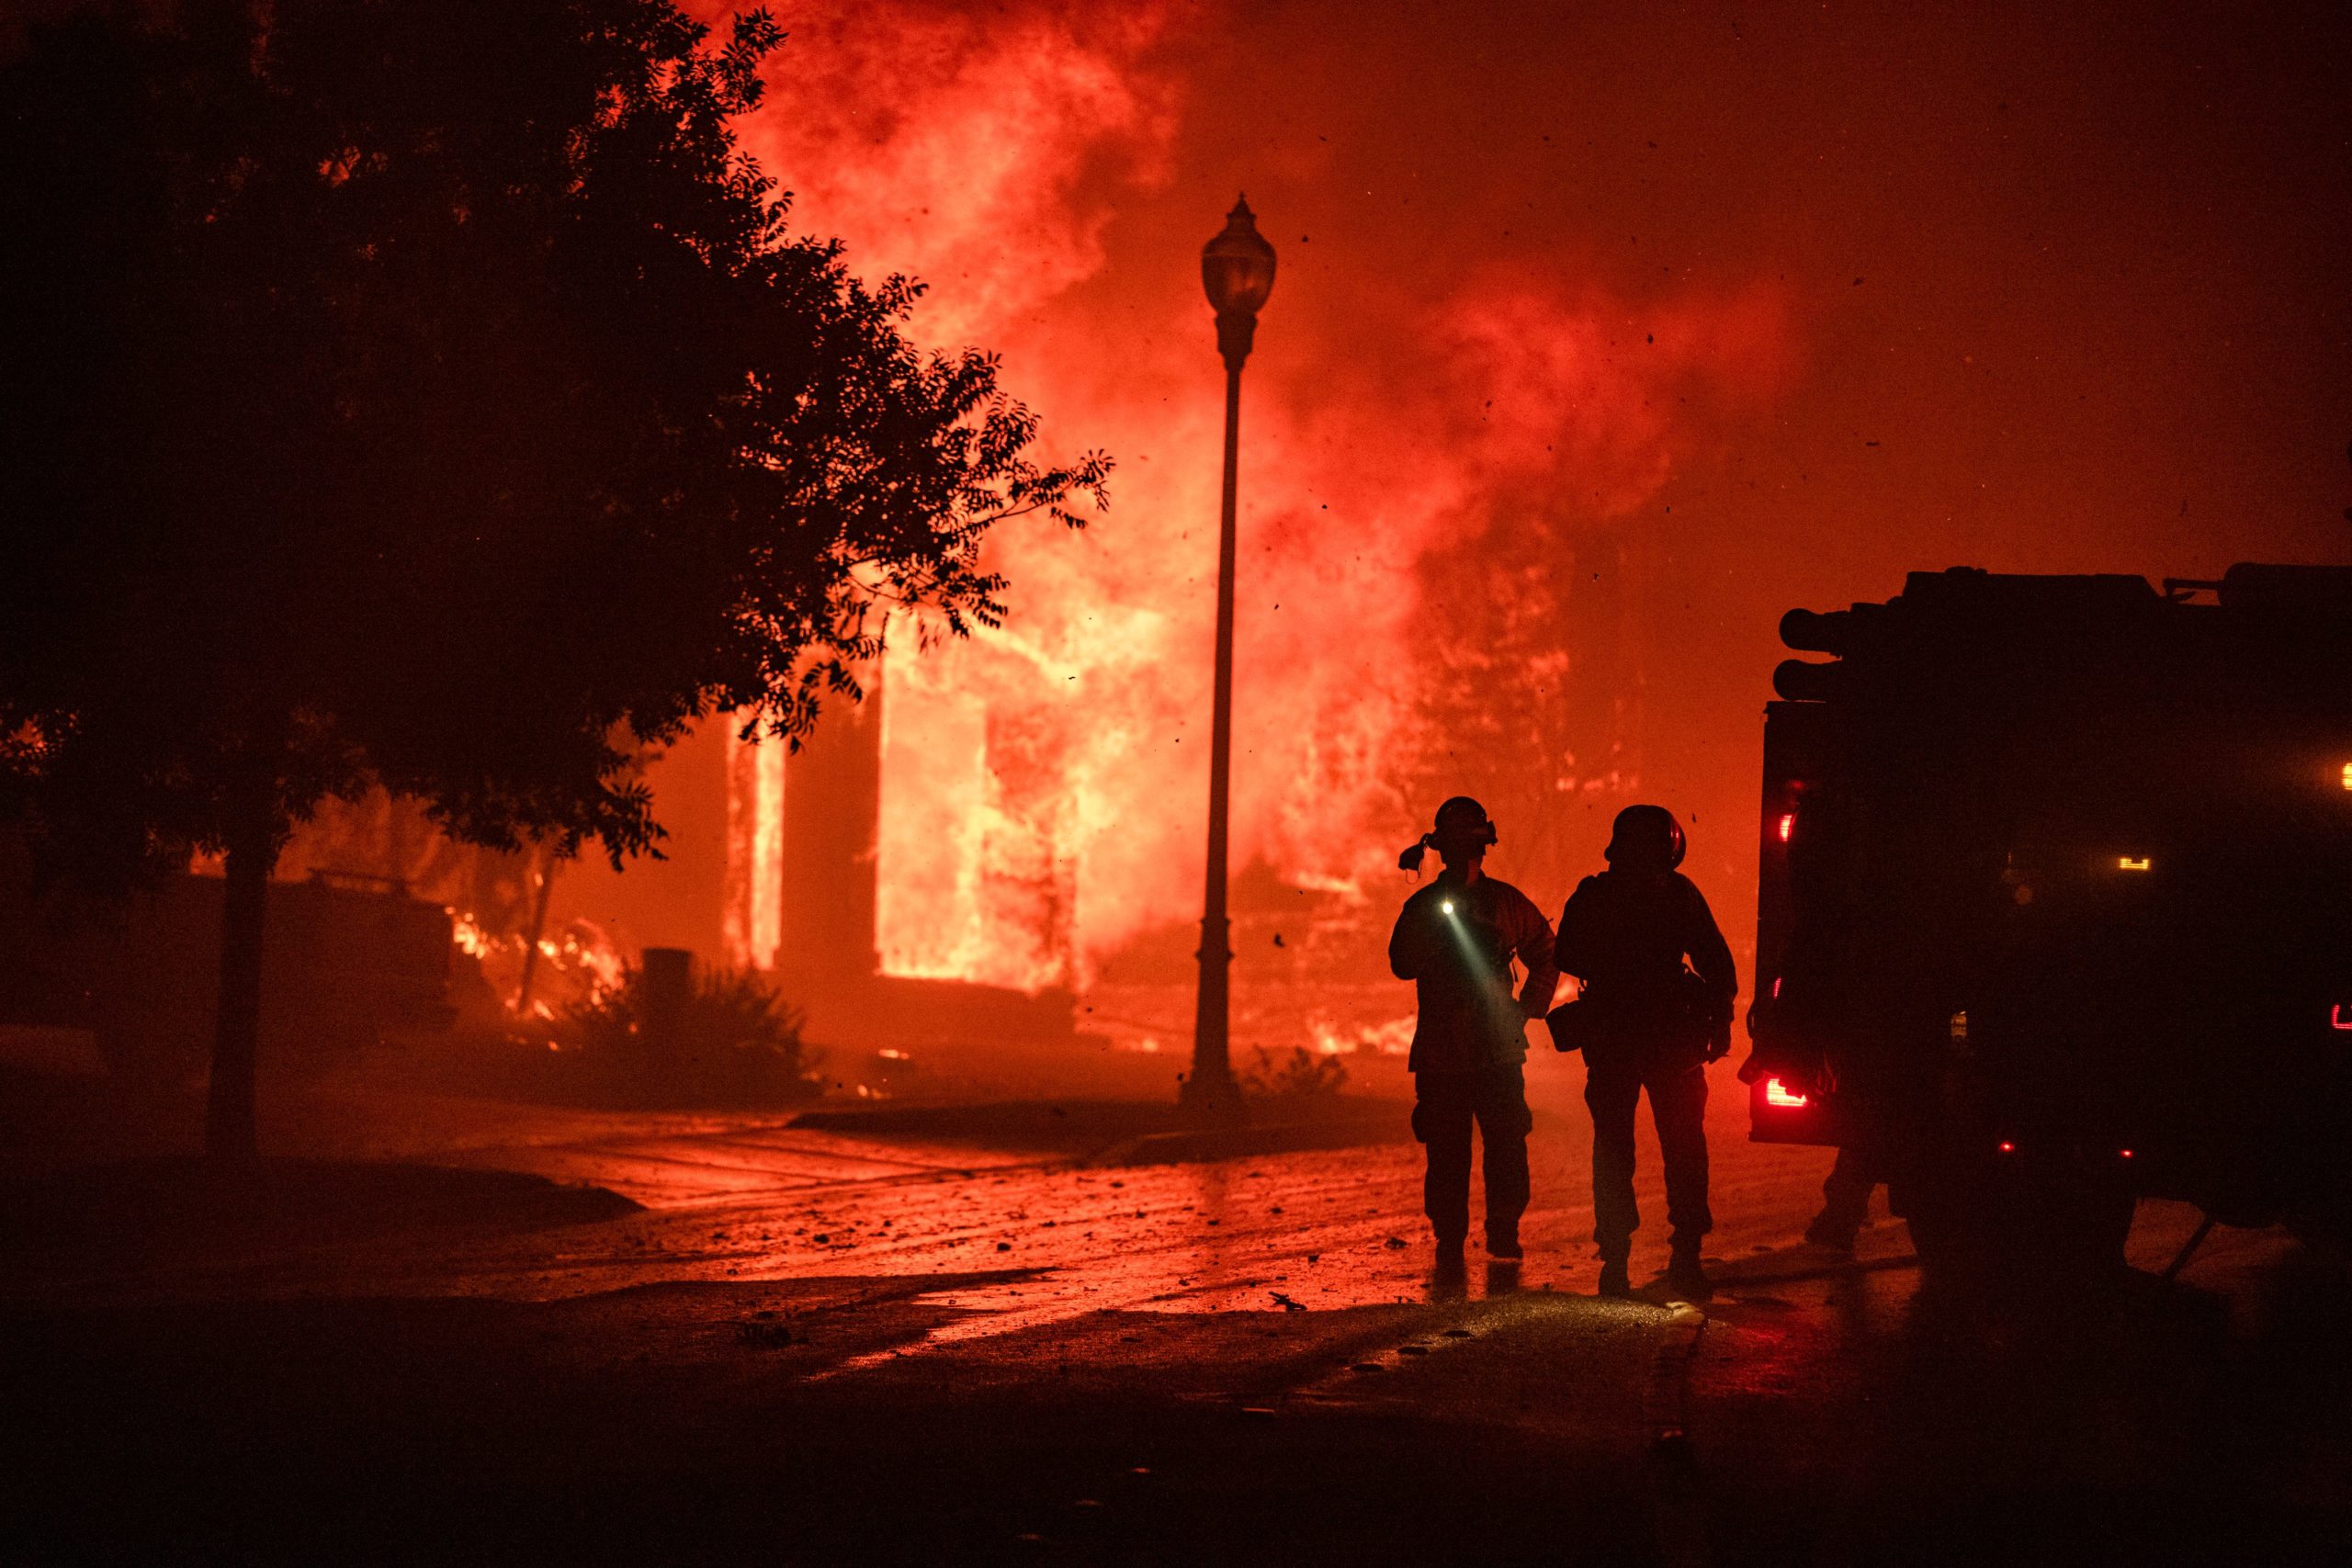 A home bursts into flames from the Shady Fire as it approaches Santa Rosa, California on September 28, 2020. (Photo: Samuel Corum, Getty Images)